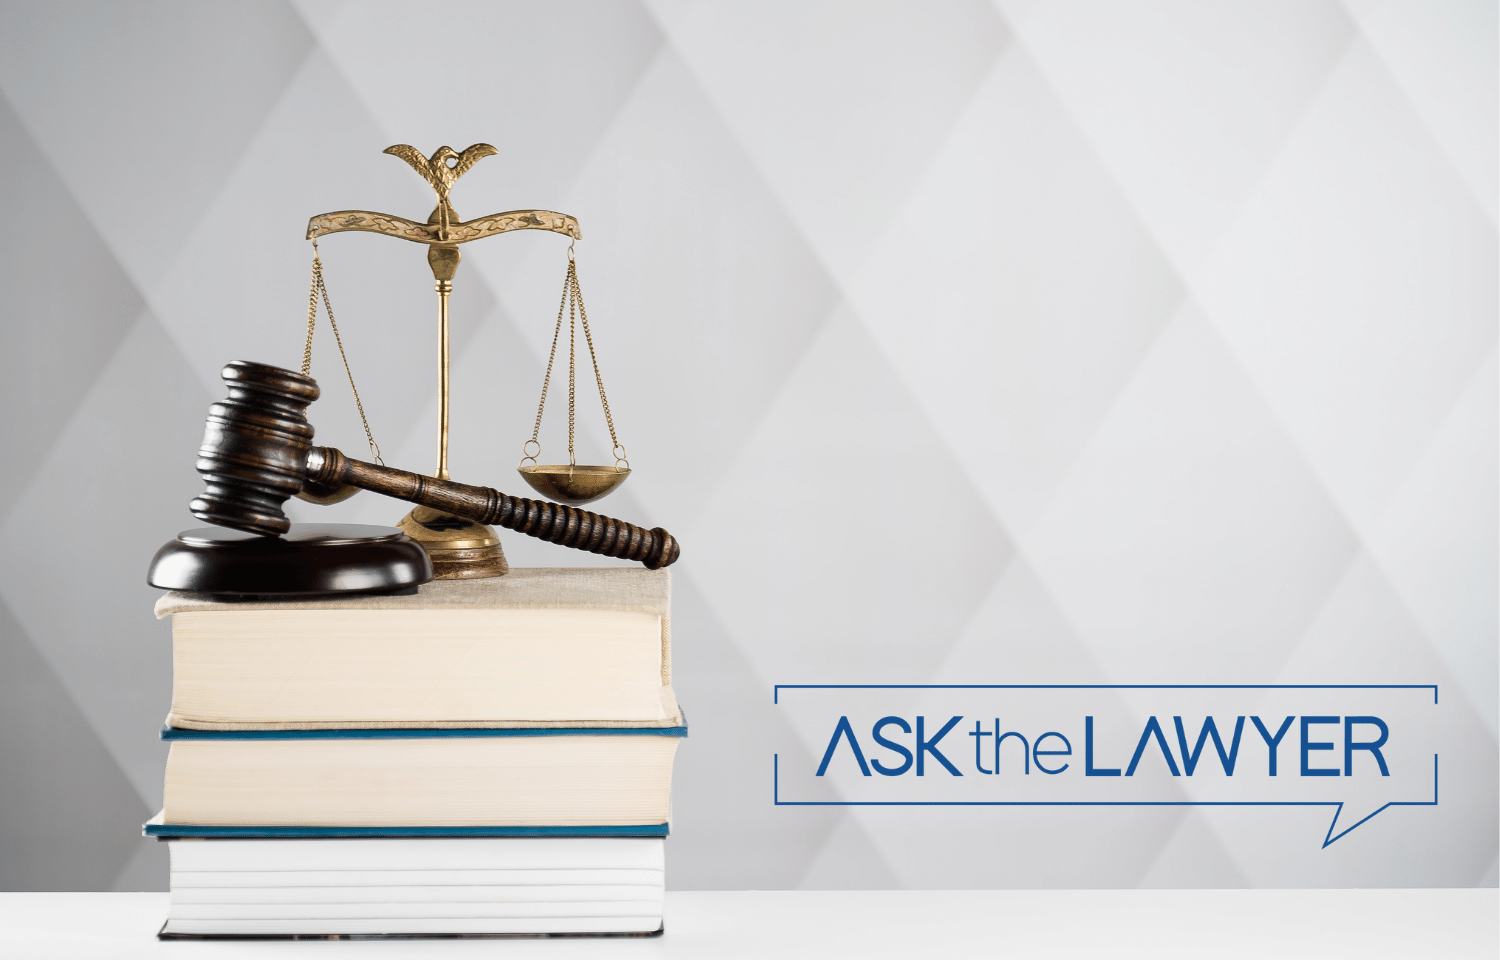 Ask The Lawyer branding